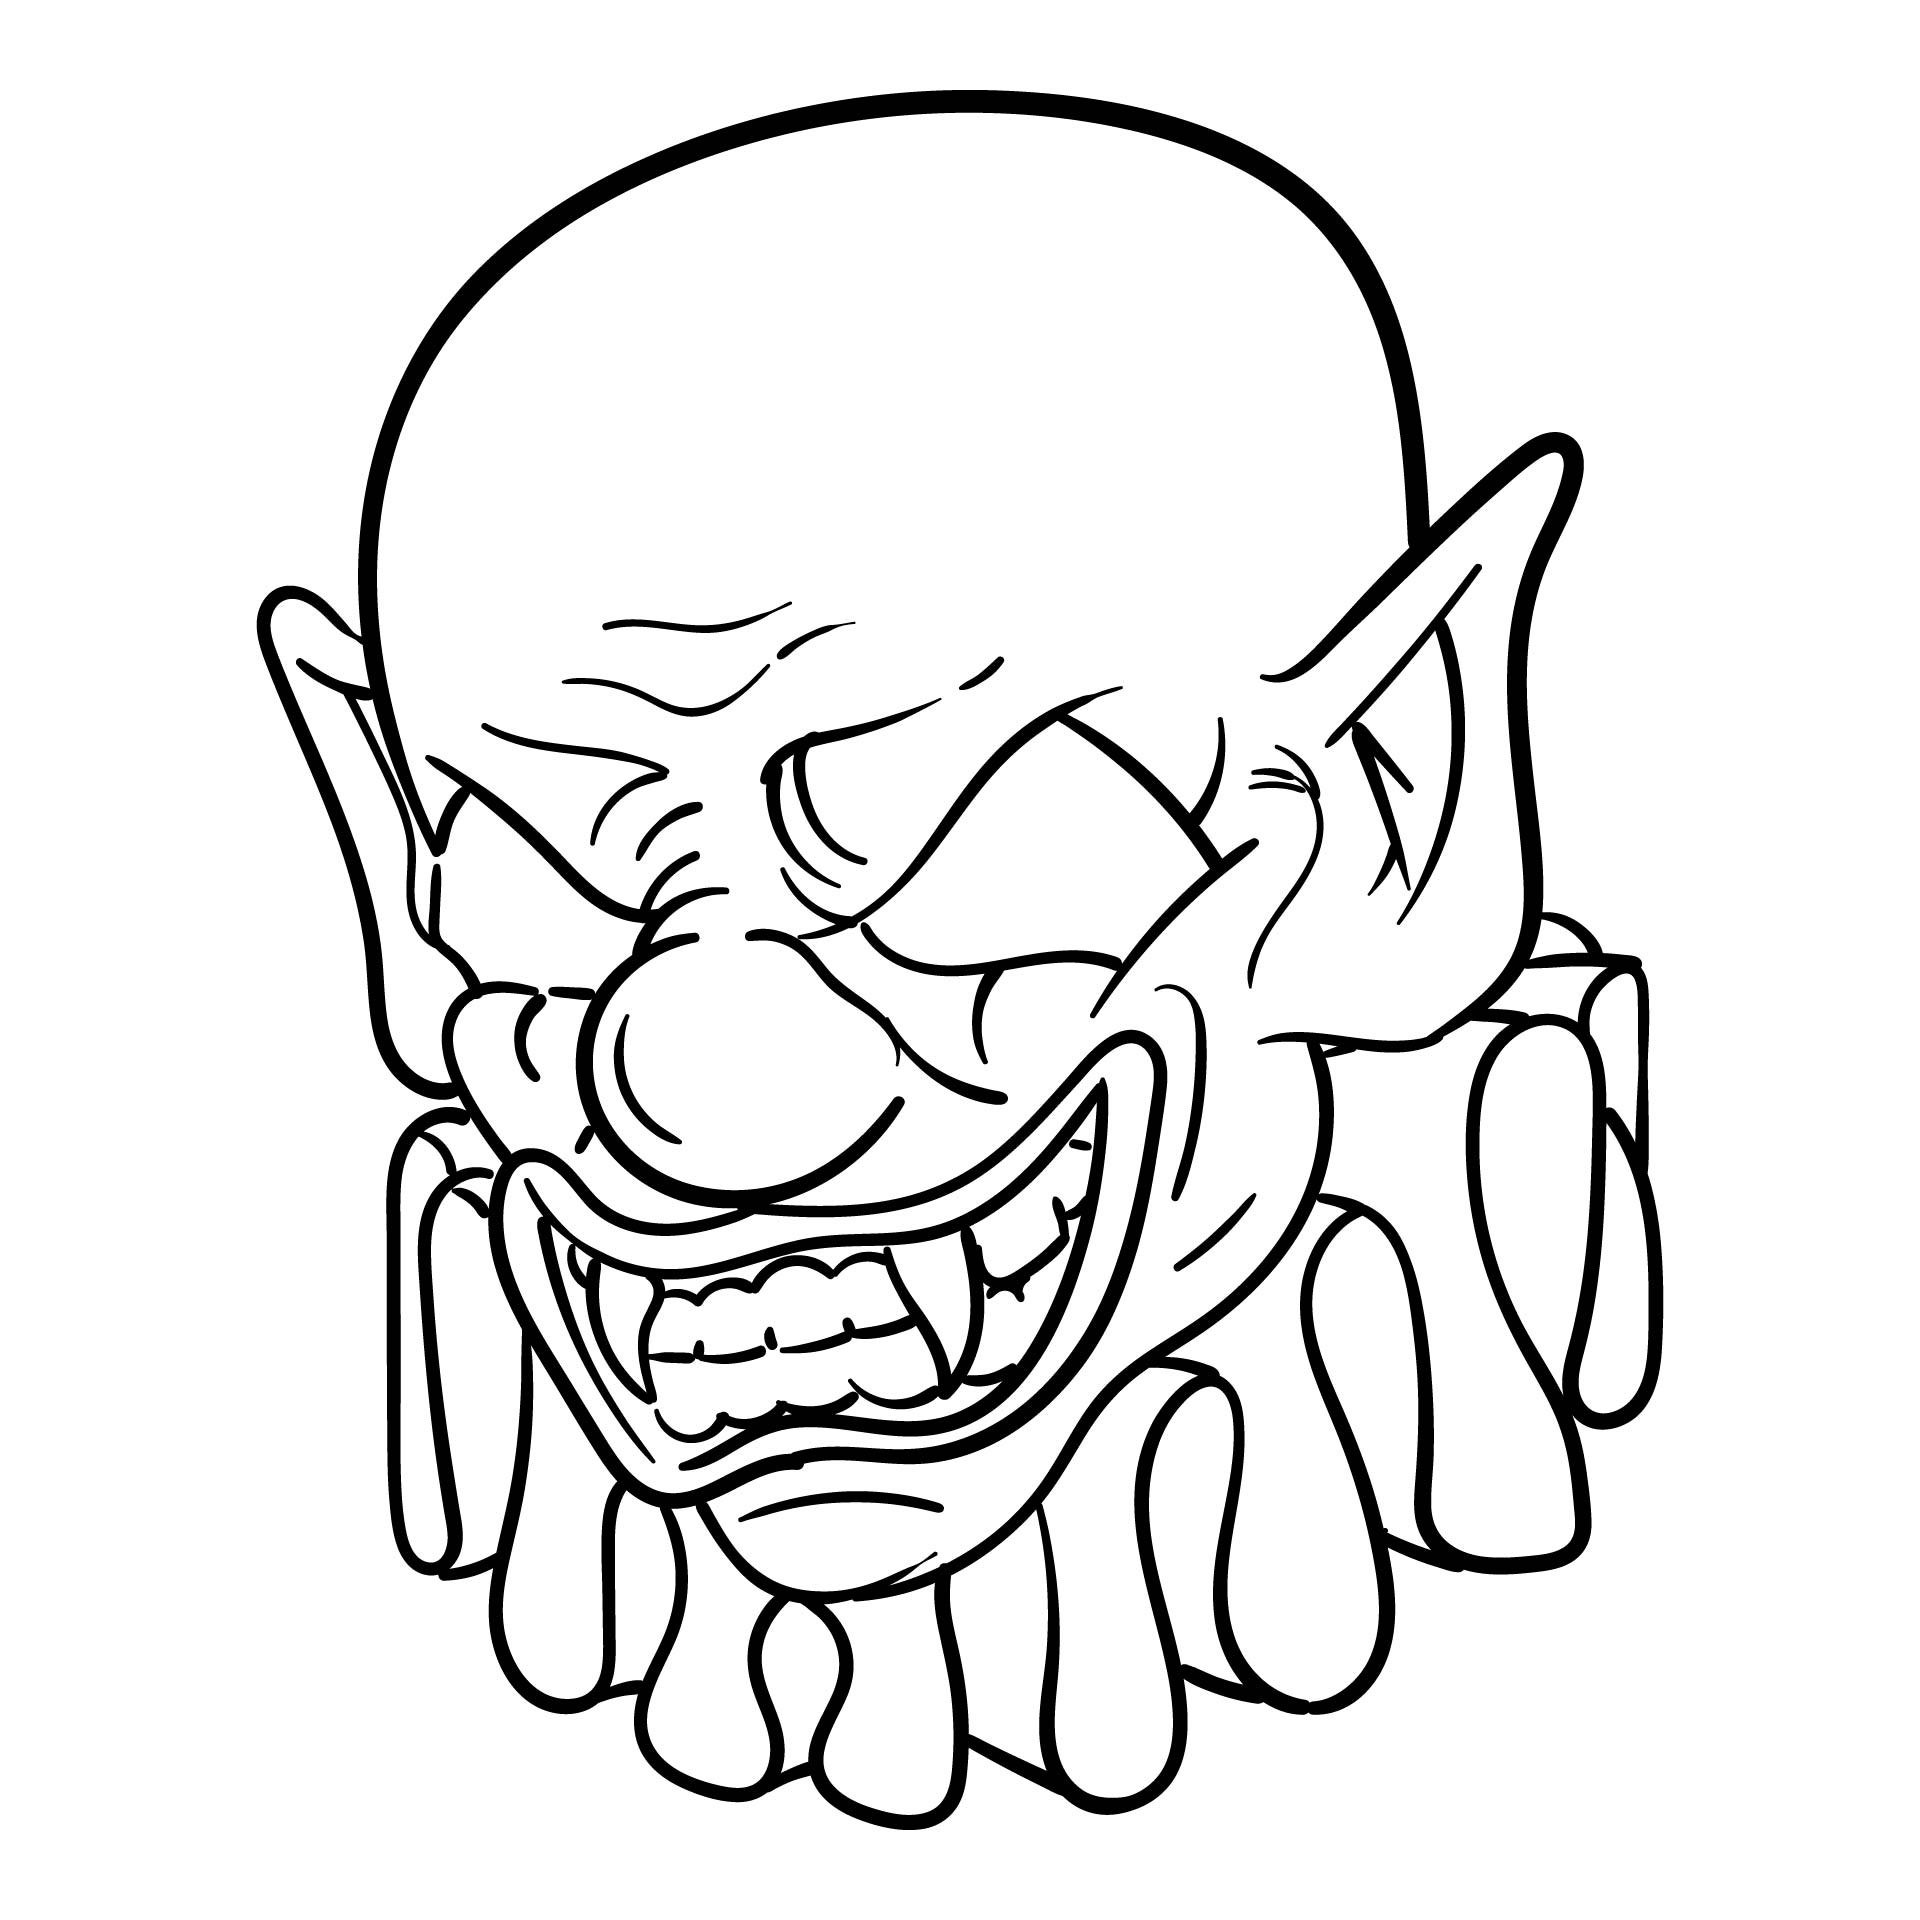 Scary Halloween Coloring Pages Free